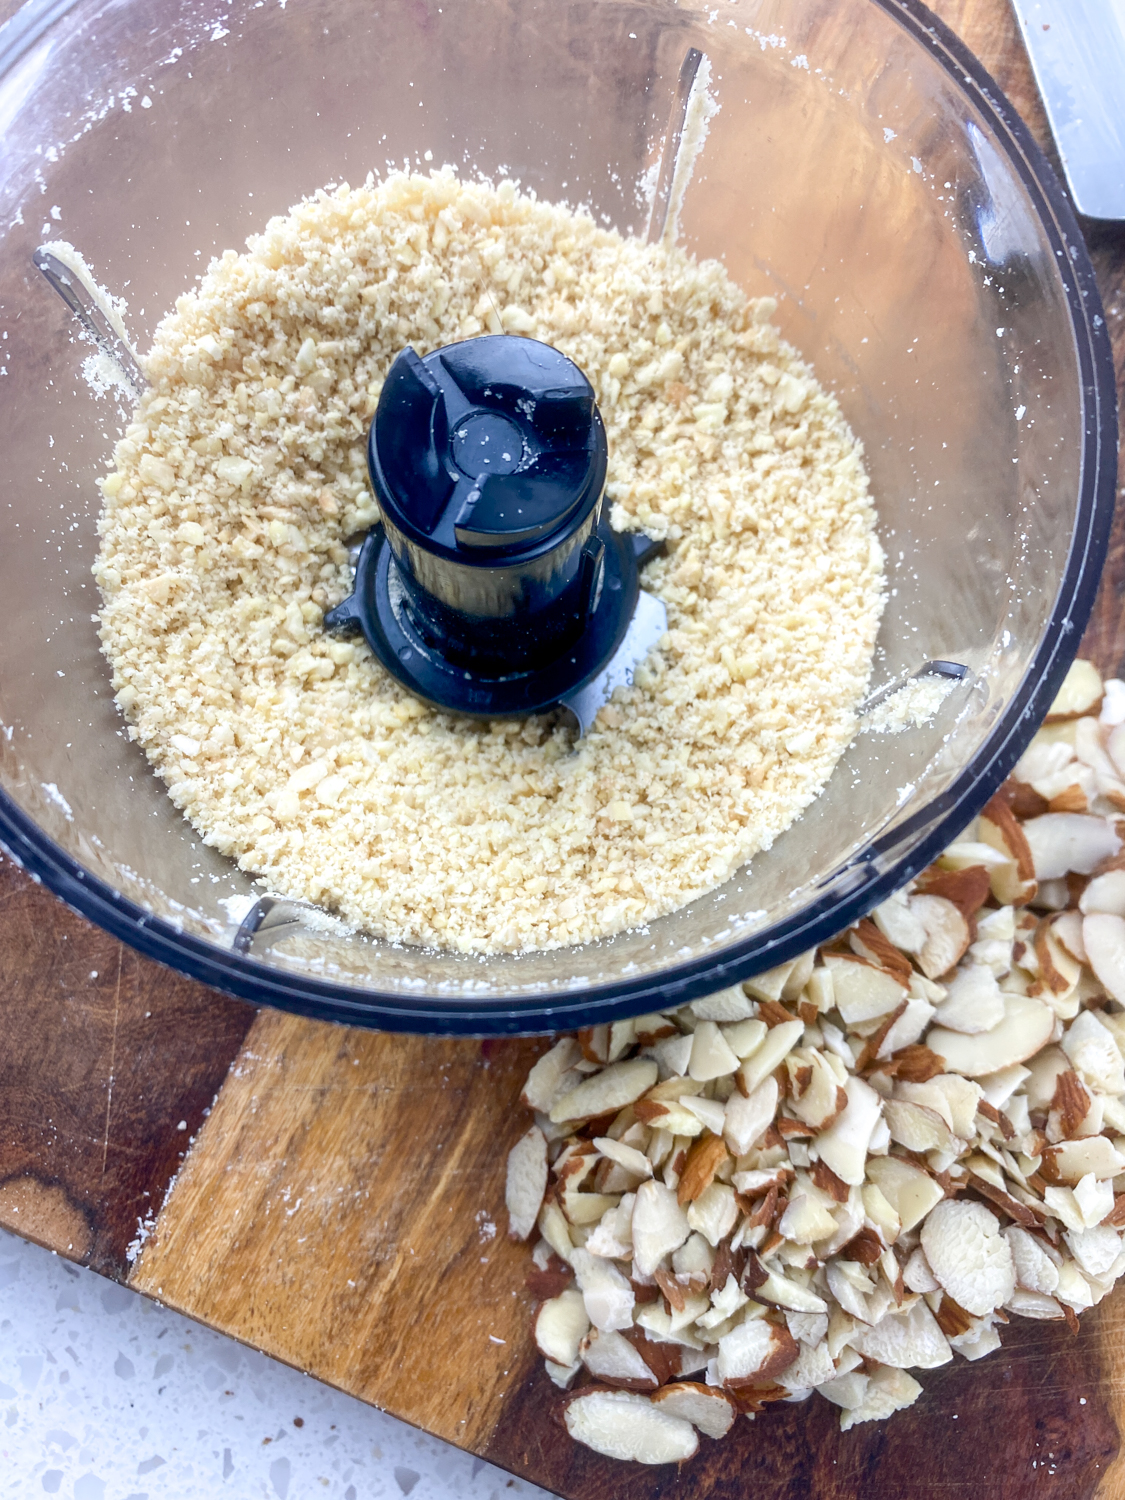 Whole roasted almonds being ground up in a food processor.